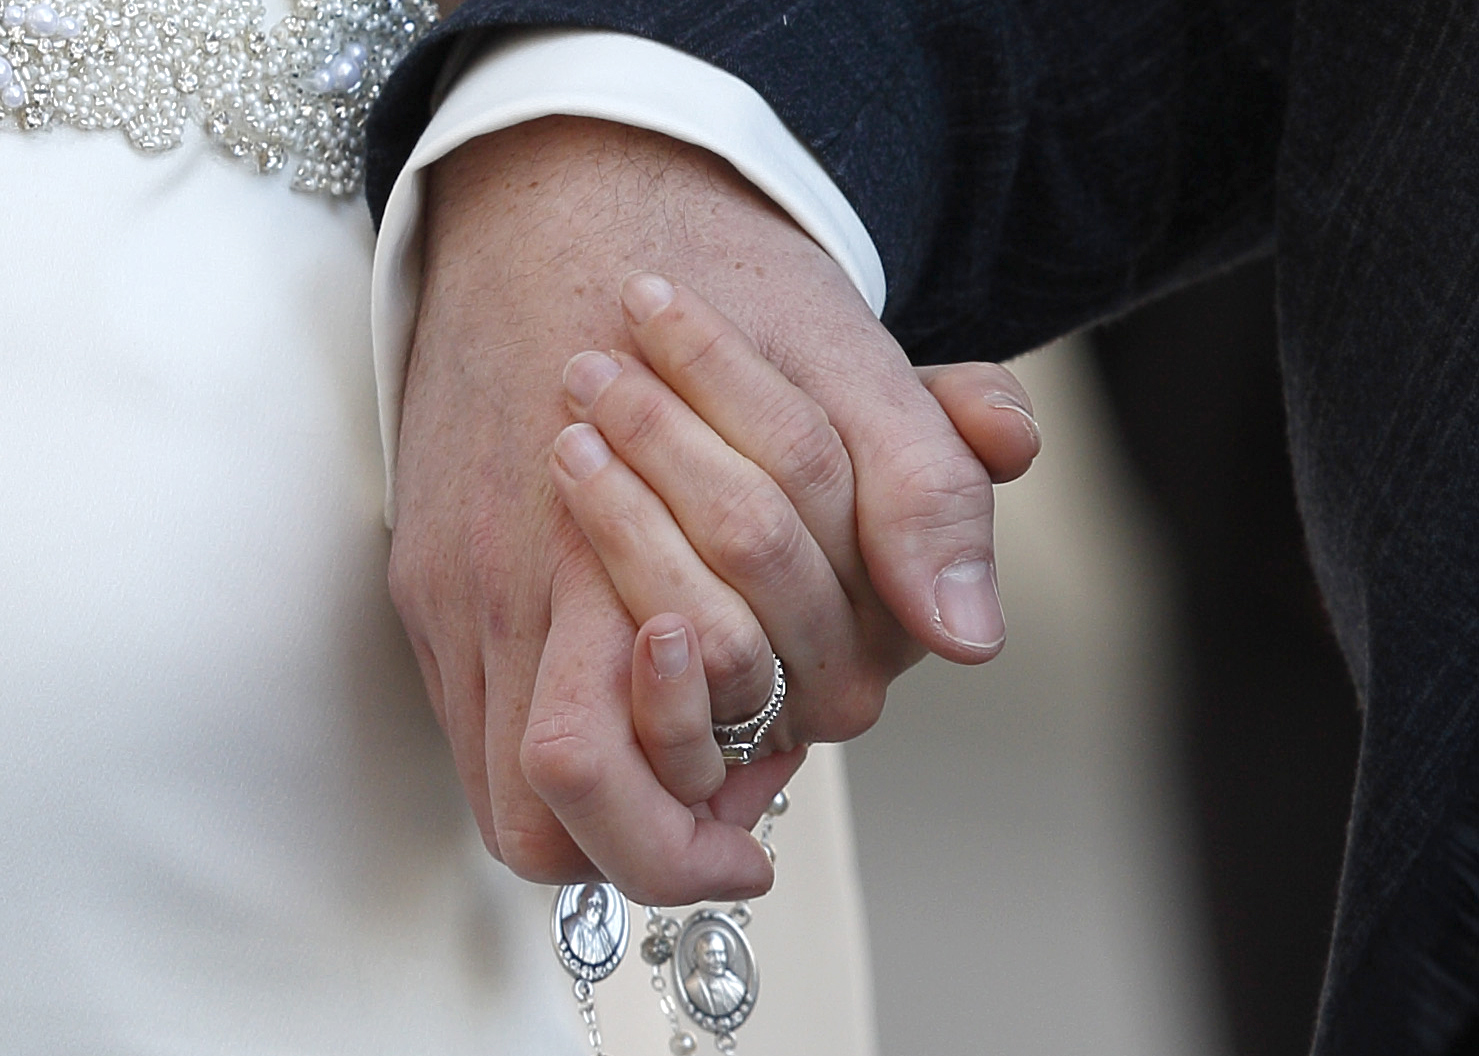 A newly married couple hold rosaries in their hands as they leave Pope Francis' general audience in St. Peter's Square at the Vatican Feb. 24. Three U.S. bishops wrote issued a joint statement reaffirming the definition of marriage as between one man and one woman and the obligation of Catholic polititicans to uphold their faith in public, following a tweet sent by Vice President Joe Biden officiating a same-sex wedding ceremony. (CNS photo/Paul Haring)